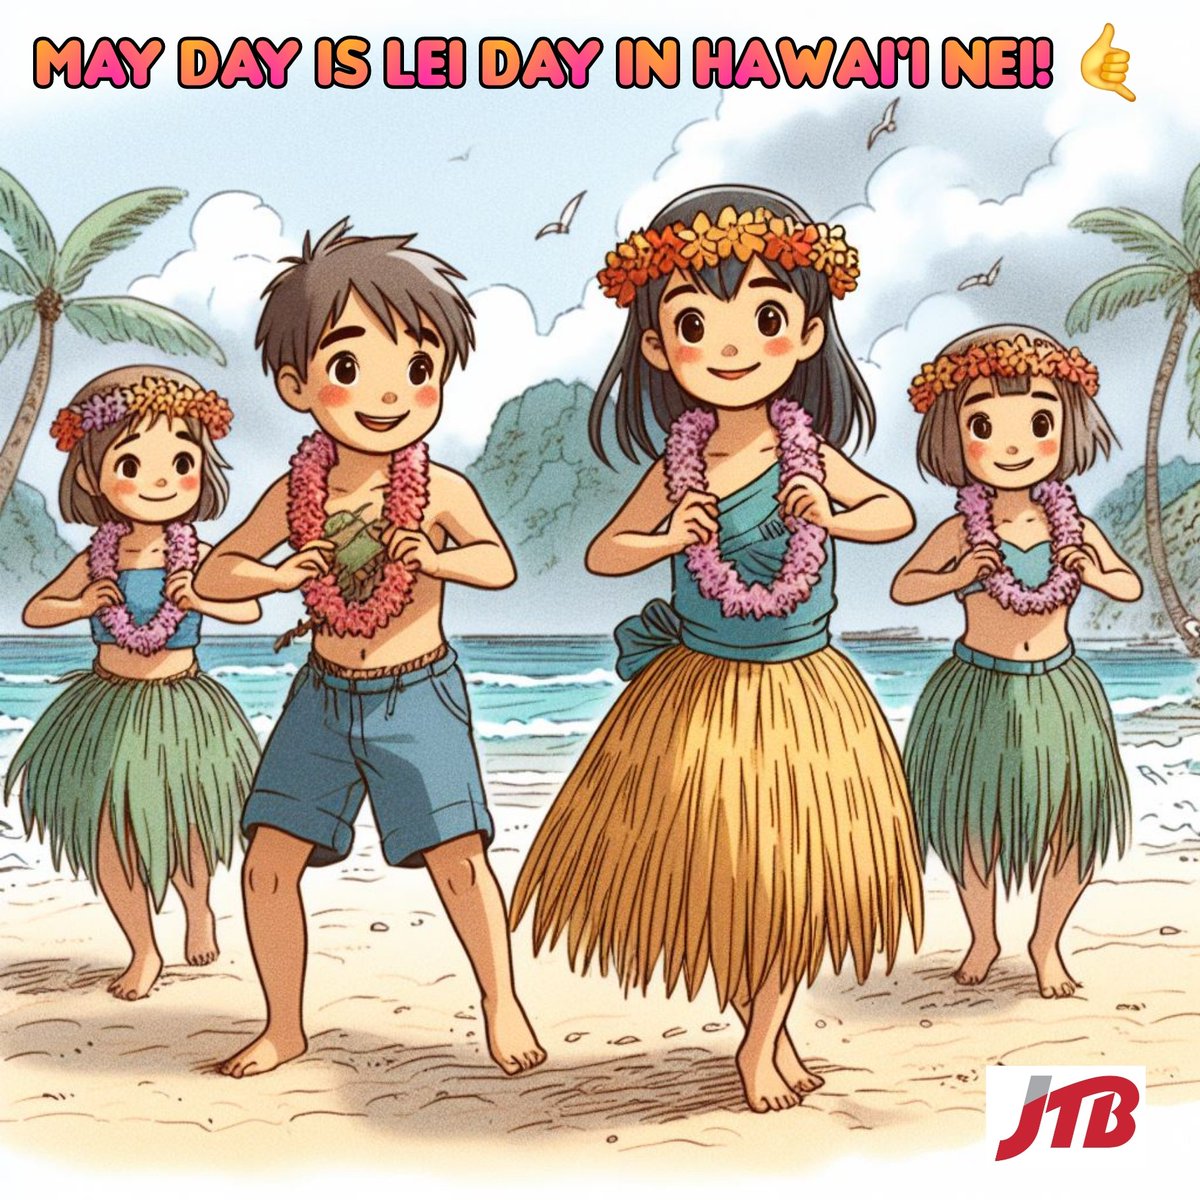 Welcome to May - come on by JTB USA Honolulu at @AlaMoanaCenter and celebrate with your next vacation! 🤙 👉 jtbusa.com/Honolulu #tour #travel #vacation #MayDay #MayDay2024 #leiday